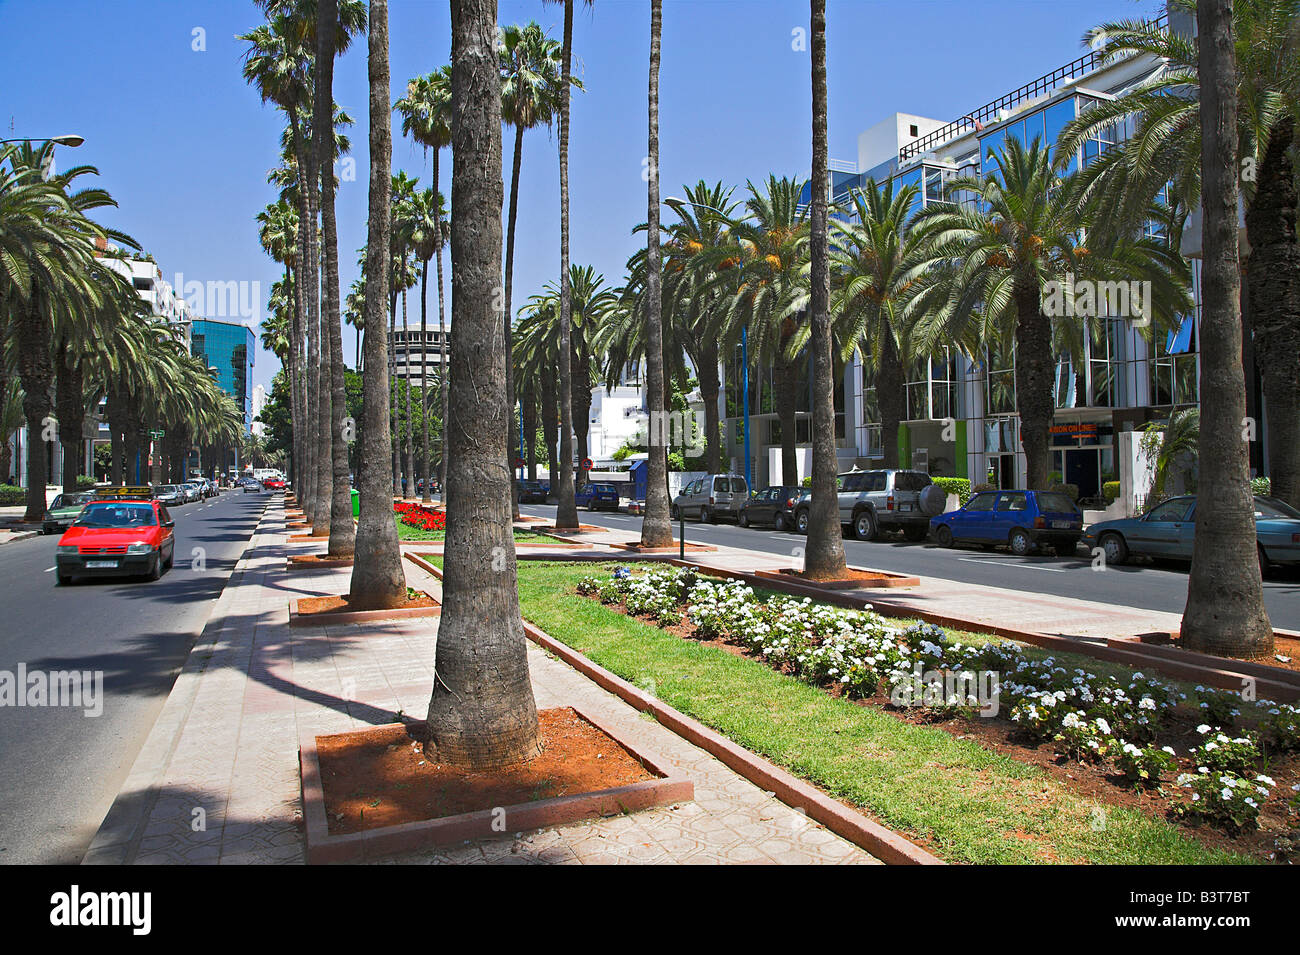 Morocco, Maghreb, Casablanca. The Boulevard de Rachidi is typical of the wide tree lined streets in the smart Lusitania district of Casablanca. Stock Photo